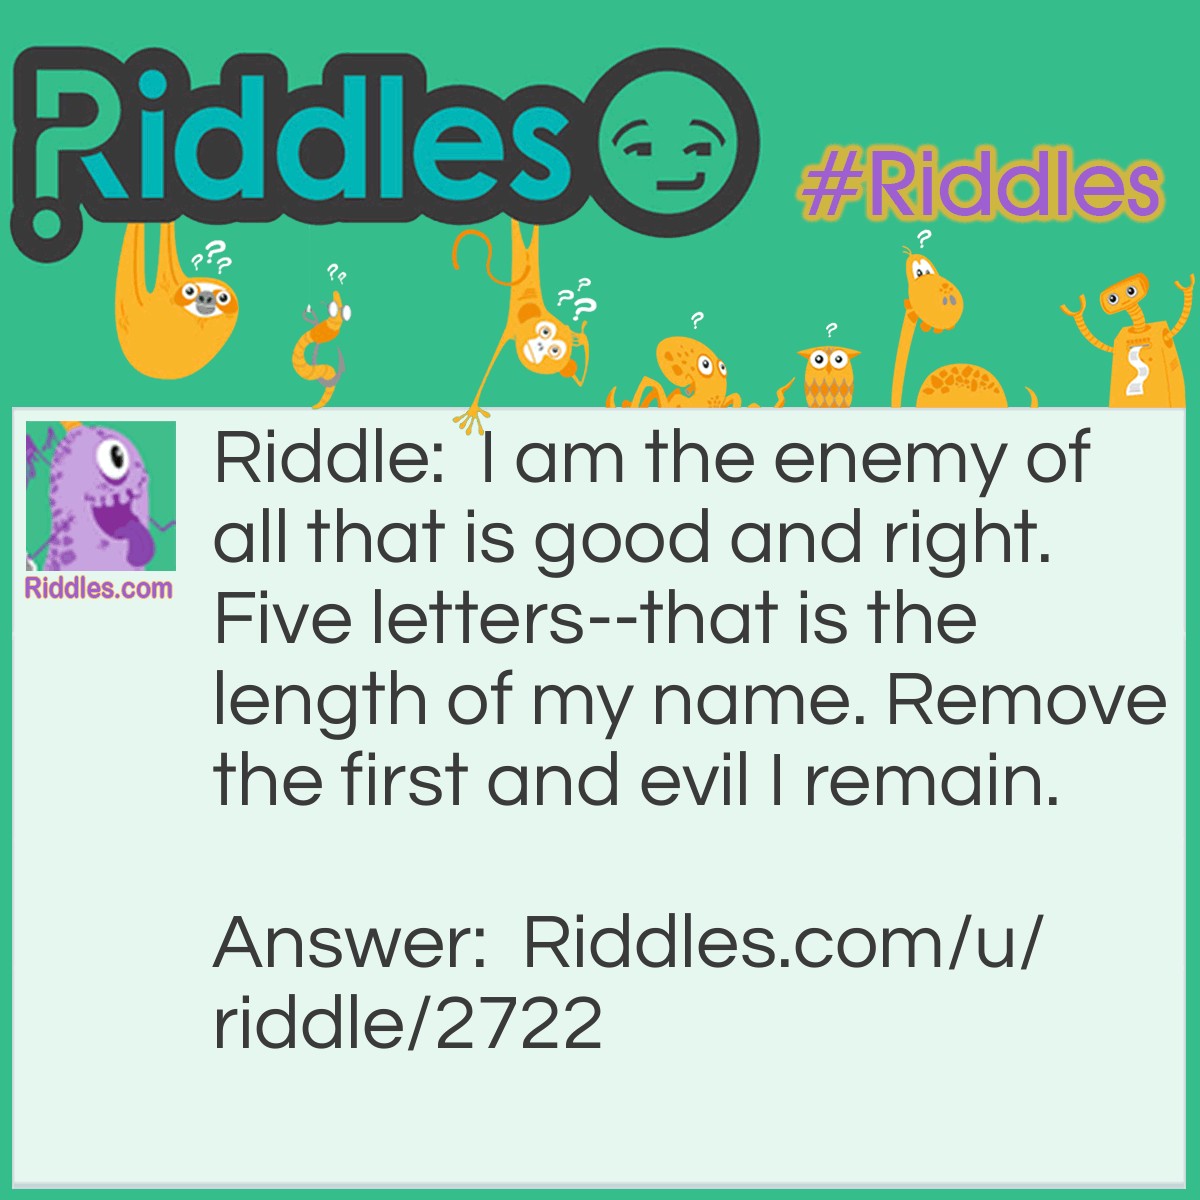 Riddle: I am the enemy of all that is good and right. Five letters--that is the length of my name. Remove the first and evil I remain. Answer: The devil. (D-evil)